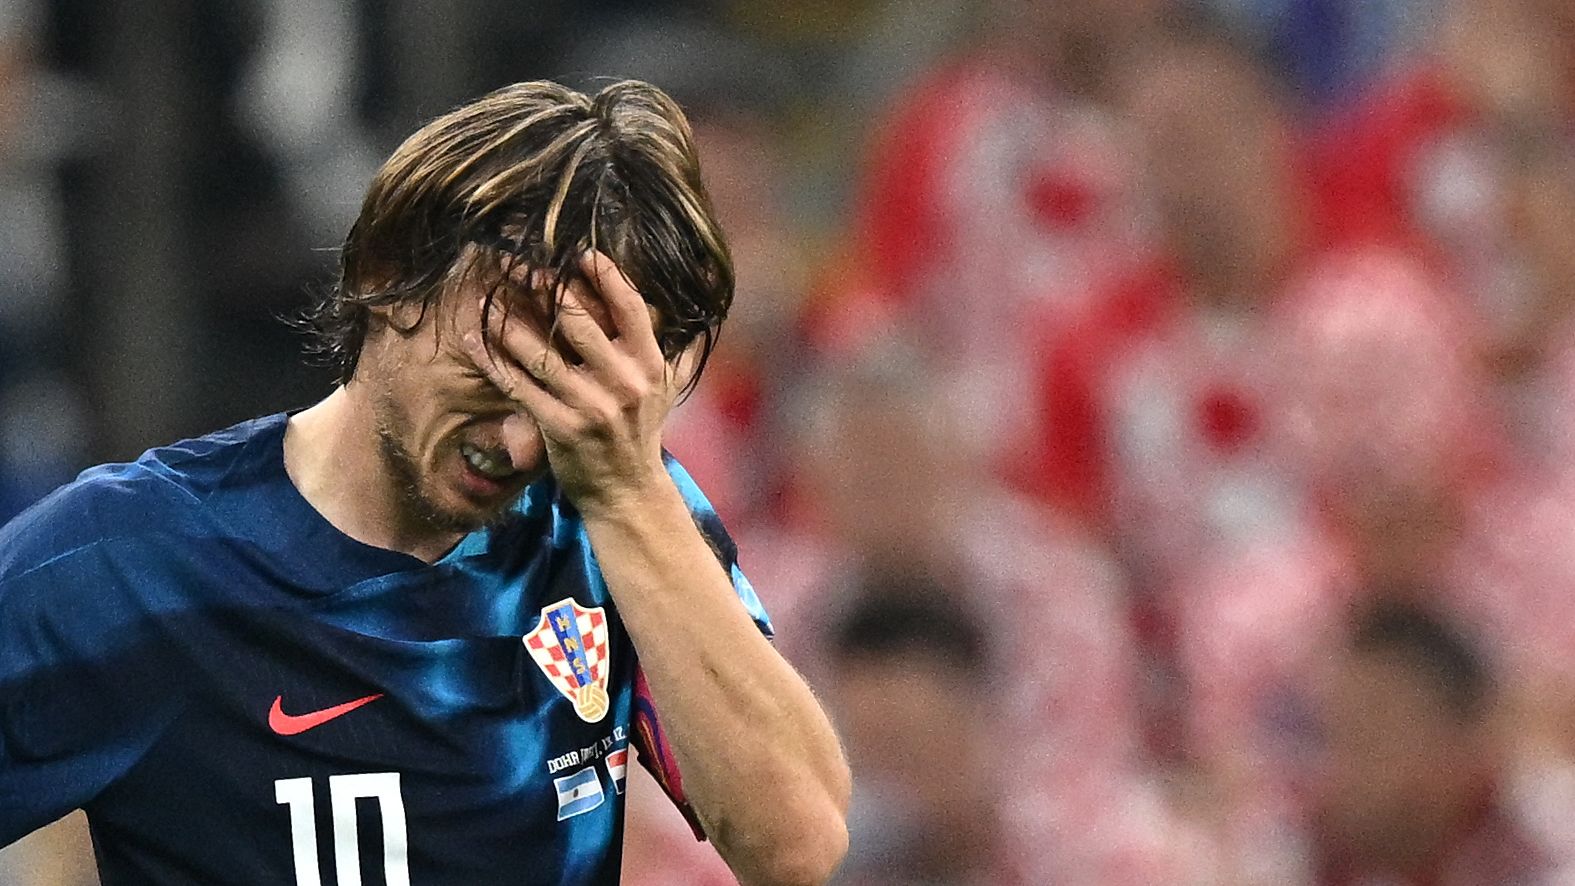 Luka Modric was unable to guide Croatia to a second consecutive World Cup final.